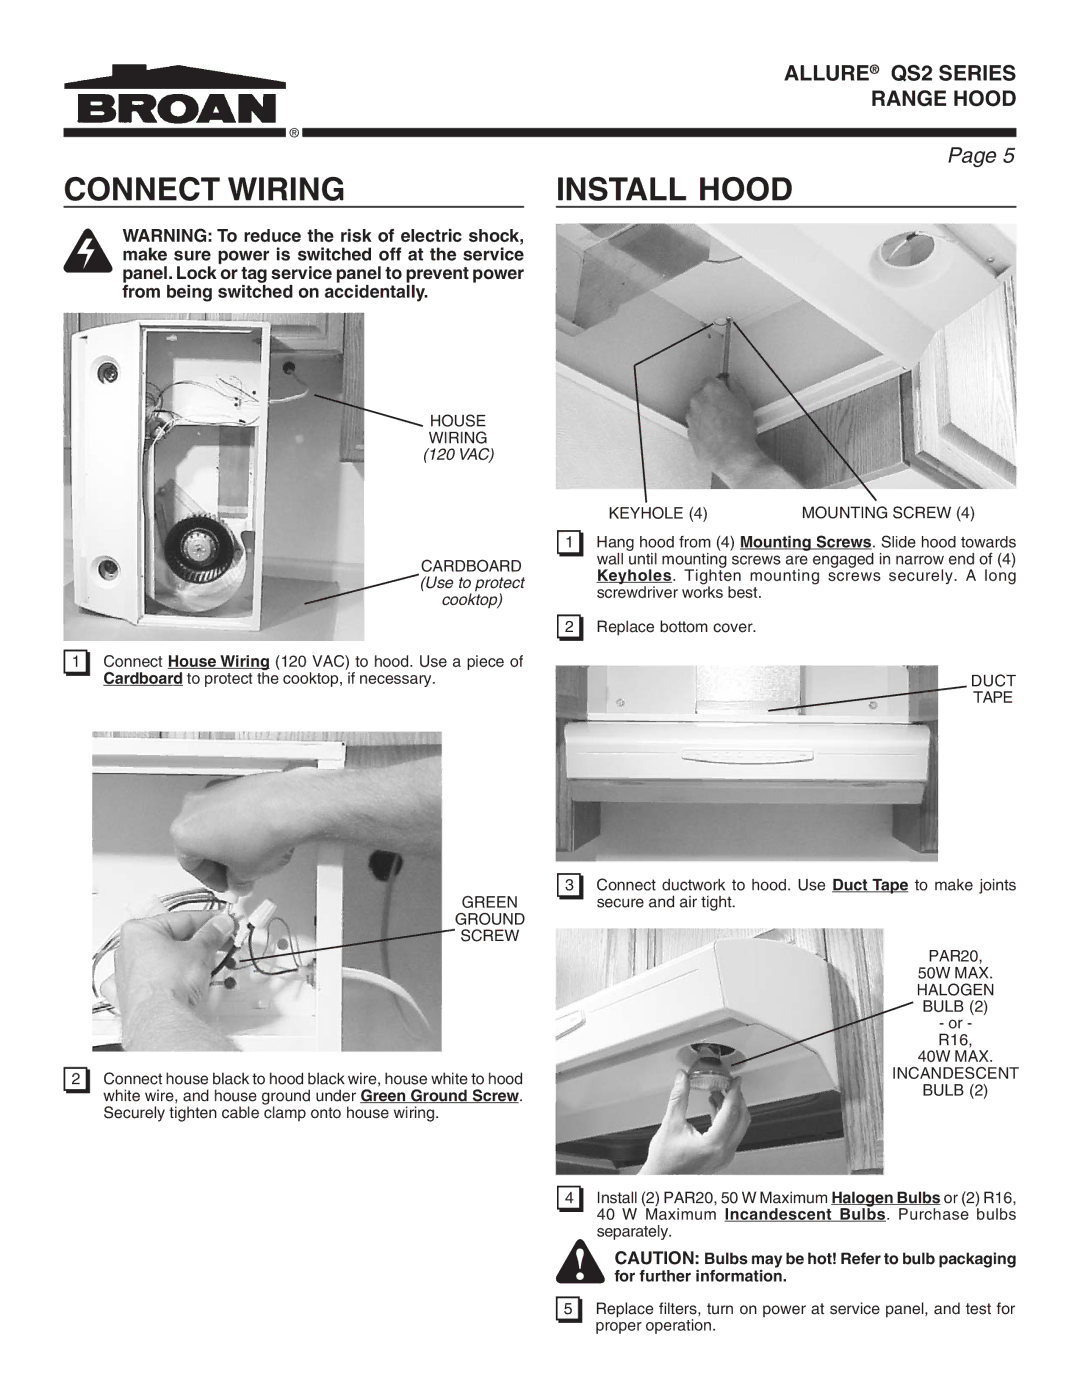 Broan QS2 warranty Connect Wiring, Install Hood 